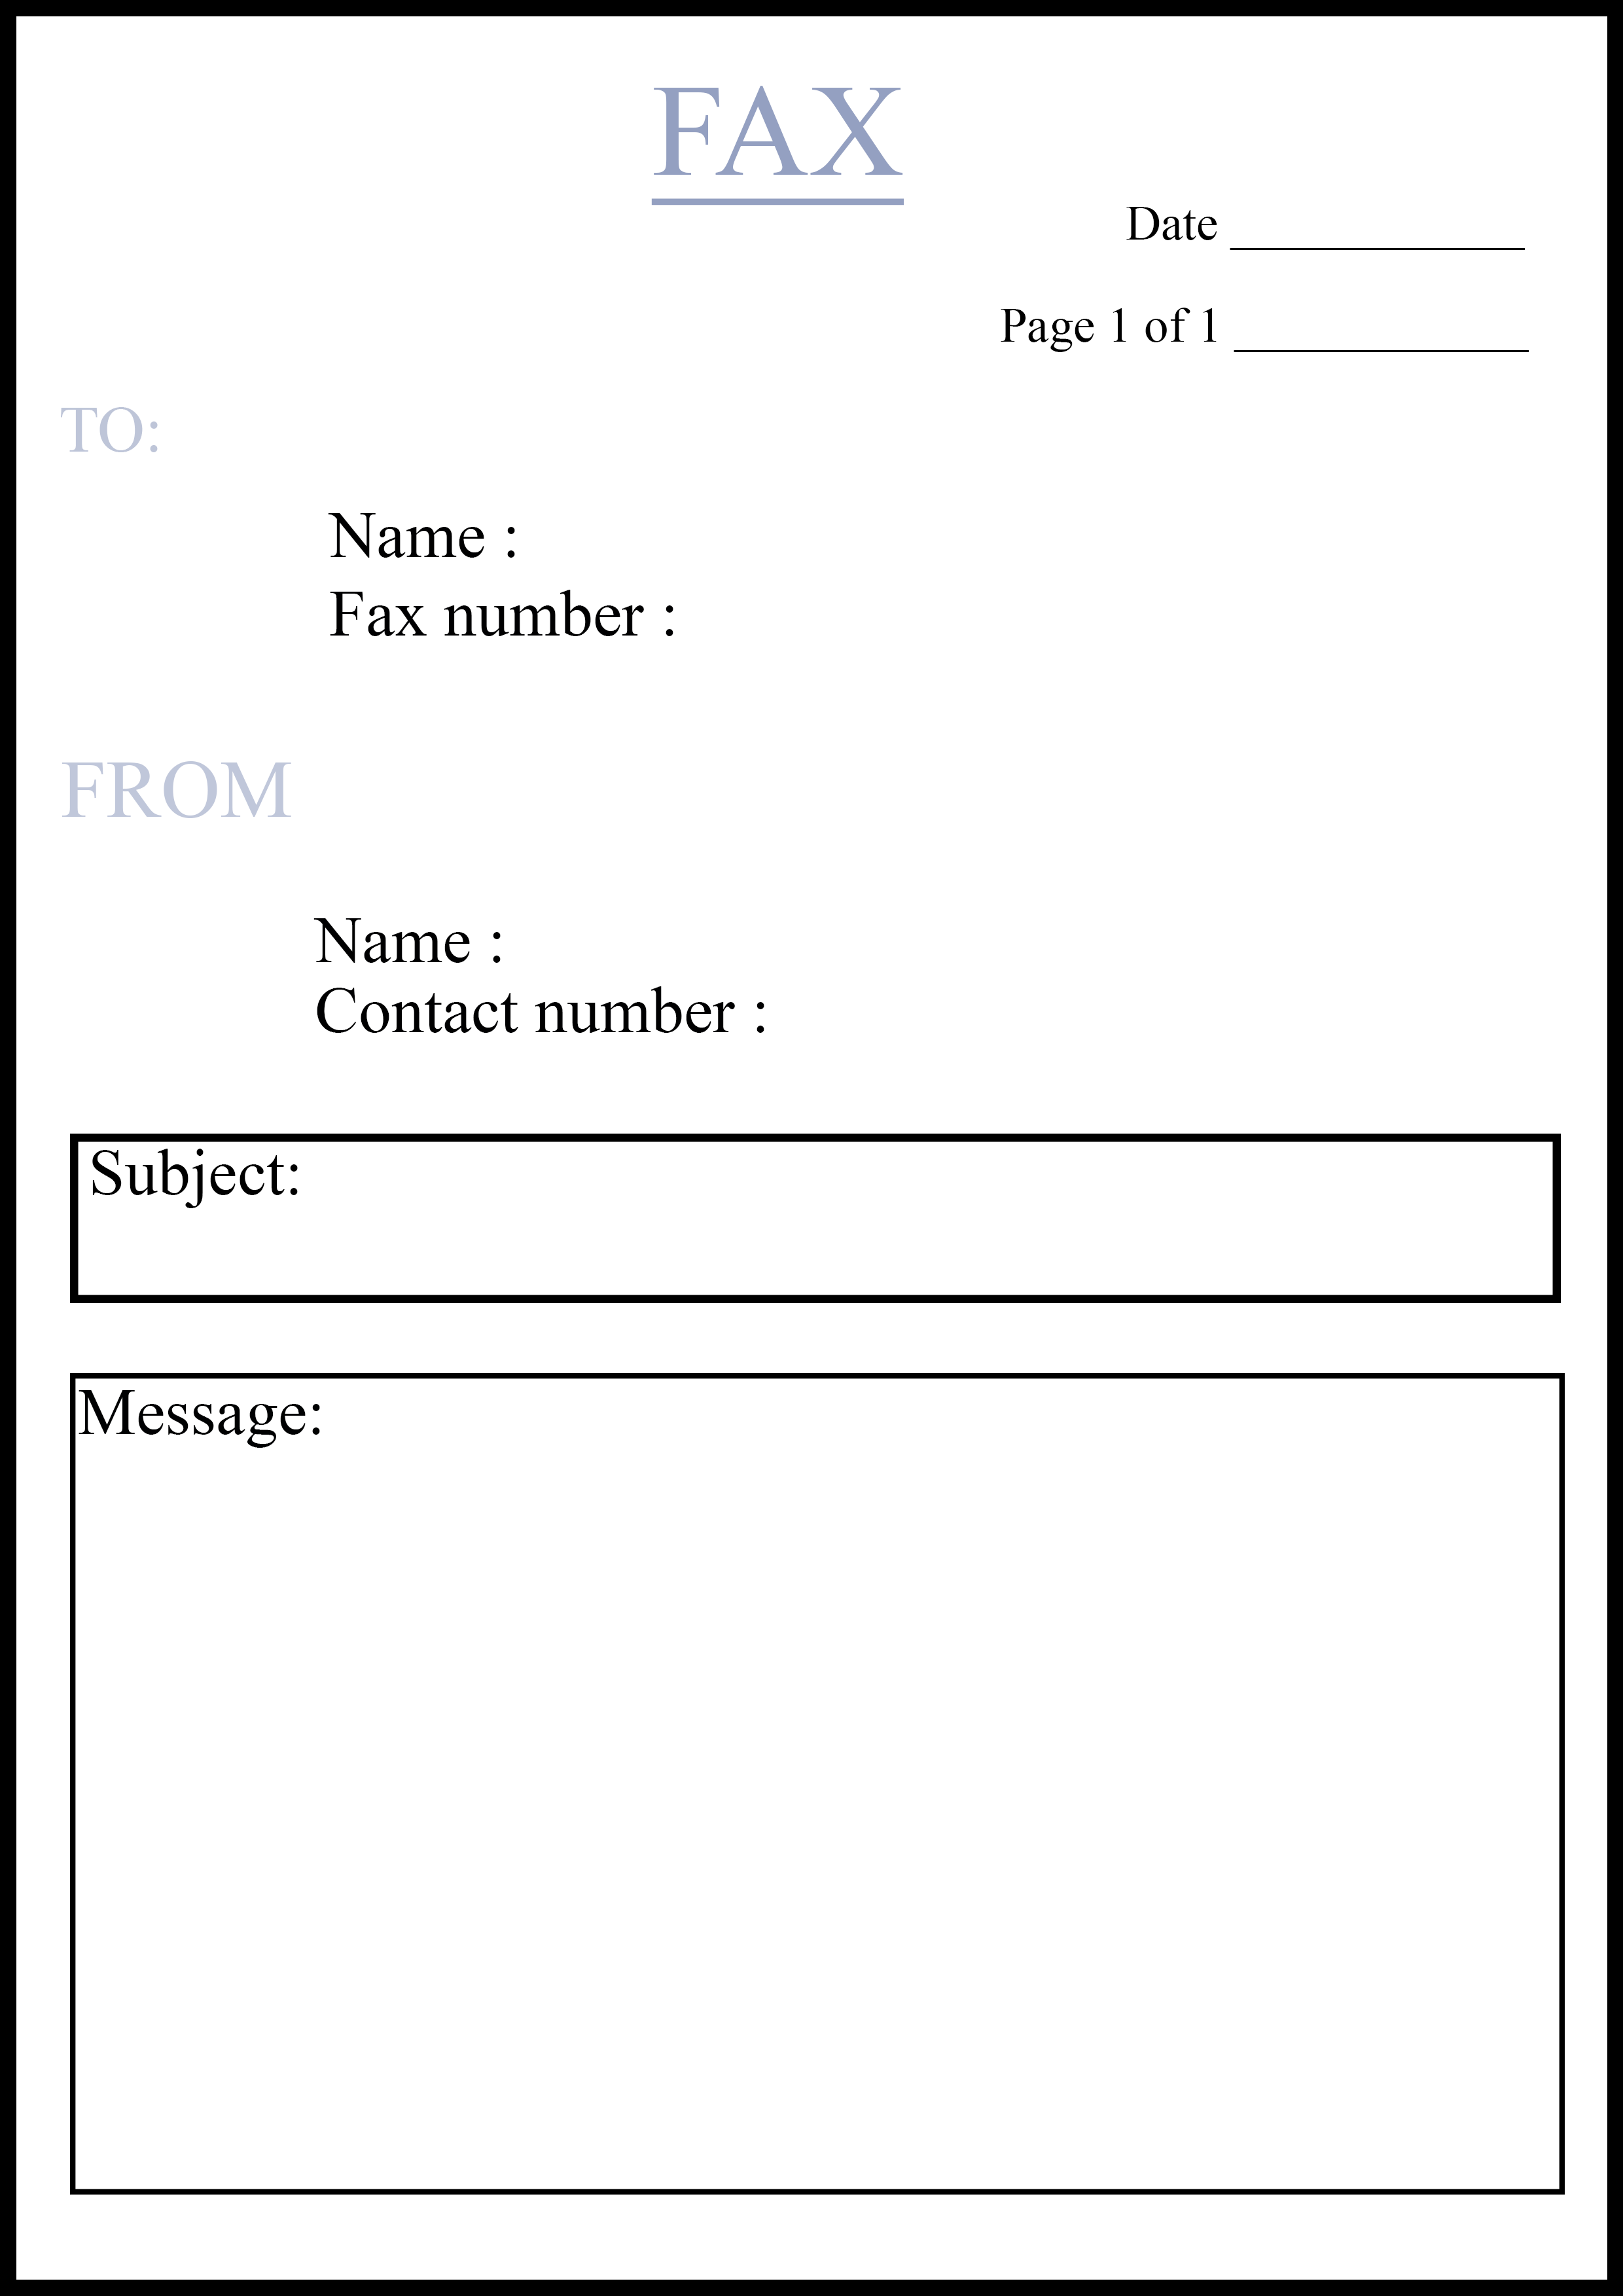 Free Personal Fax Cover Sheet or Letter Templates